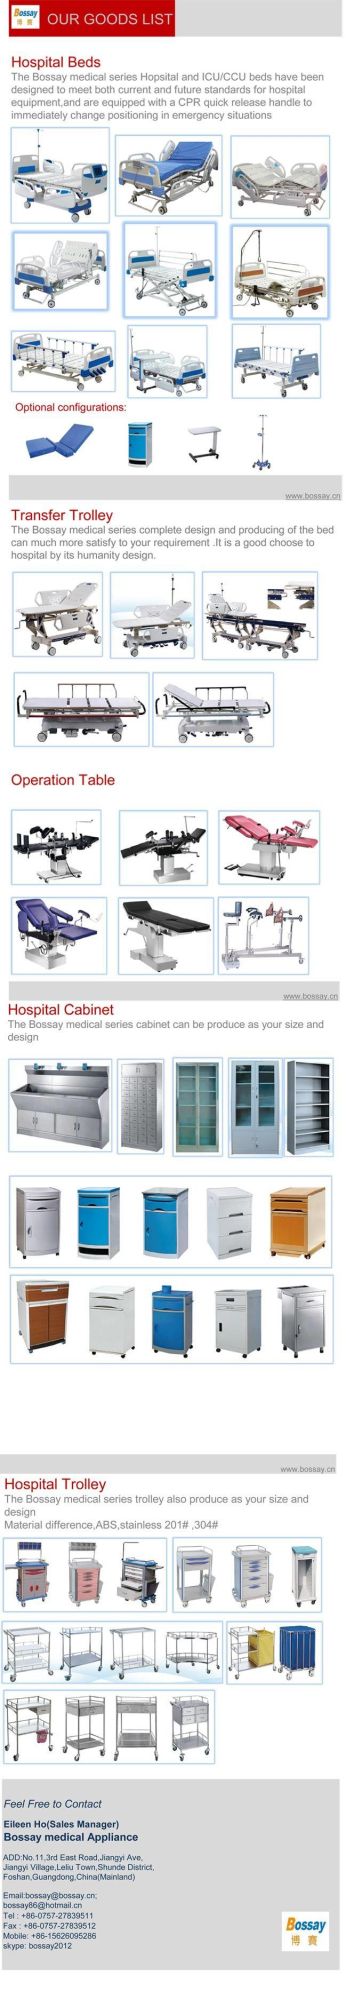 Two Function Manual Hospital Patients Bed BS-728A